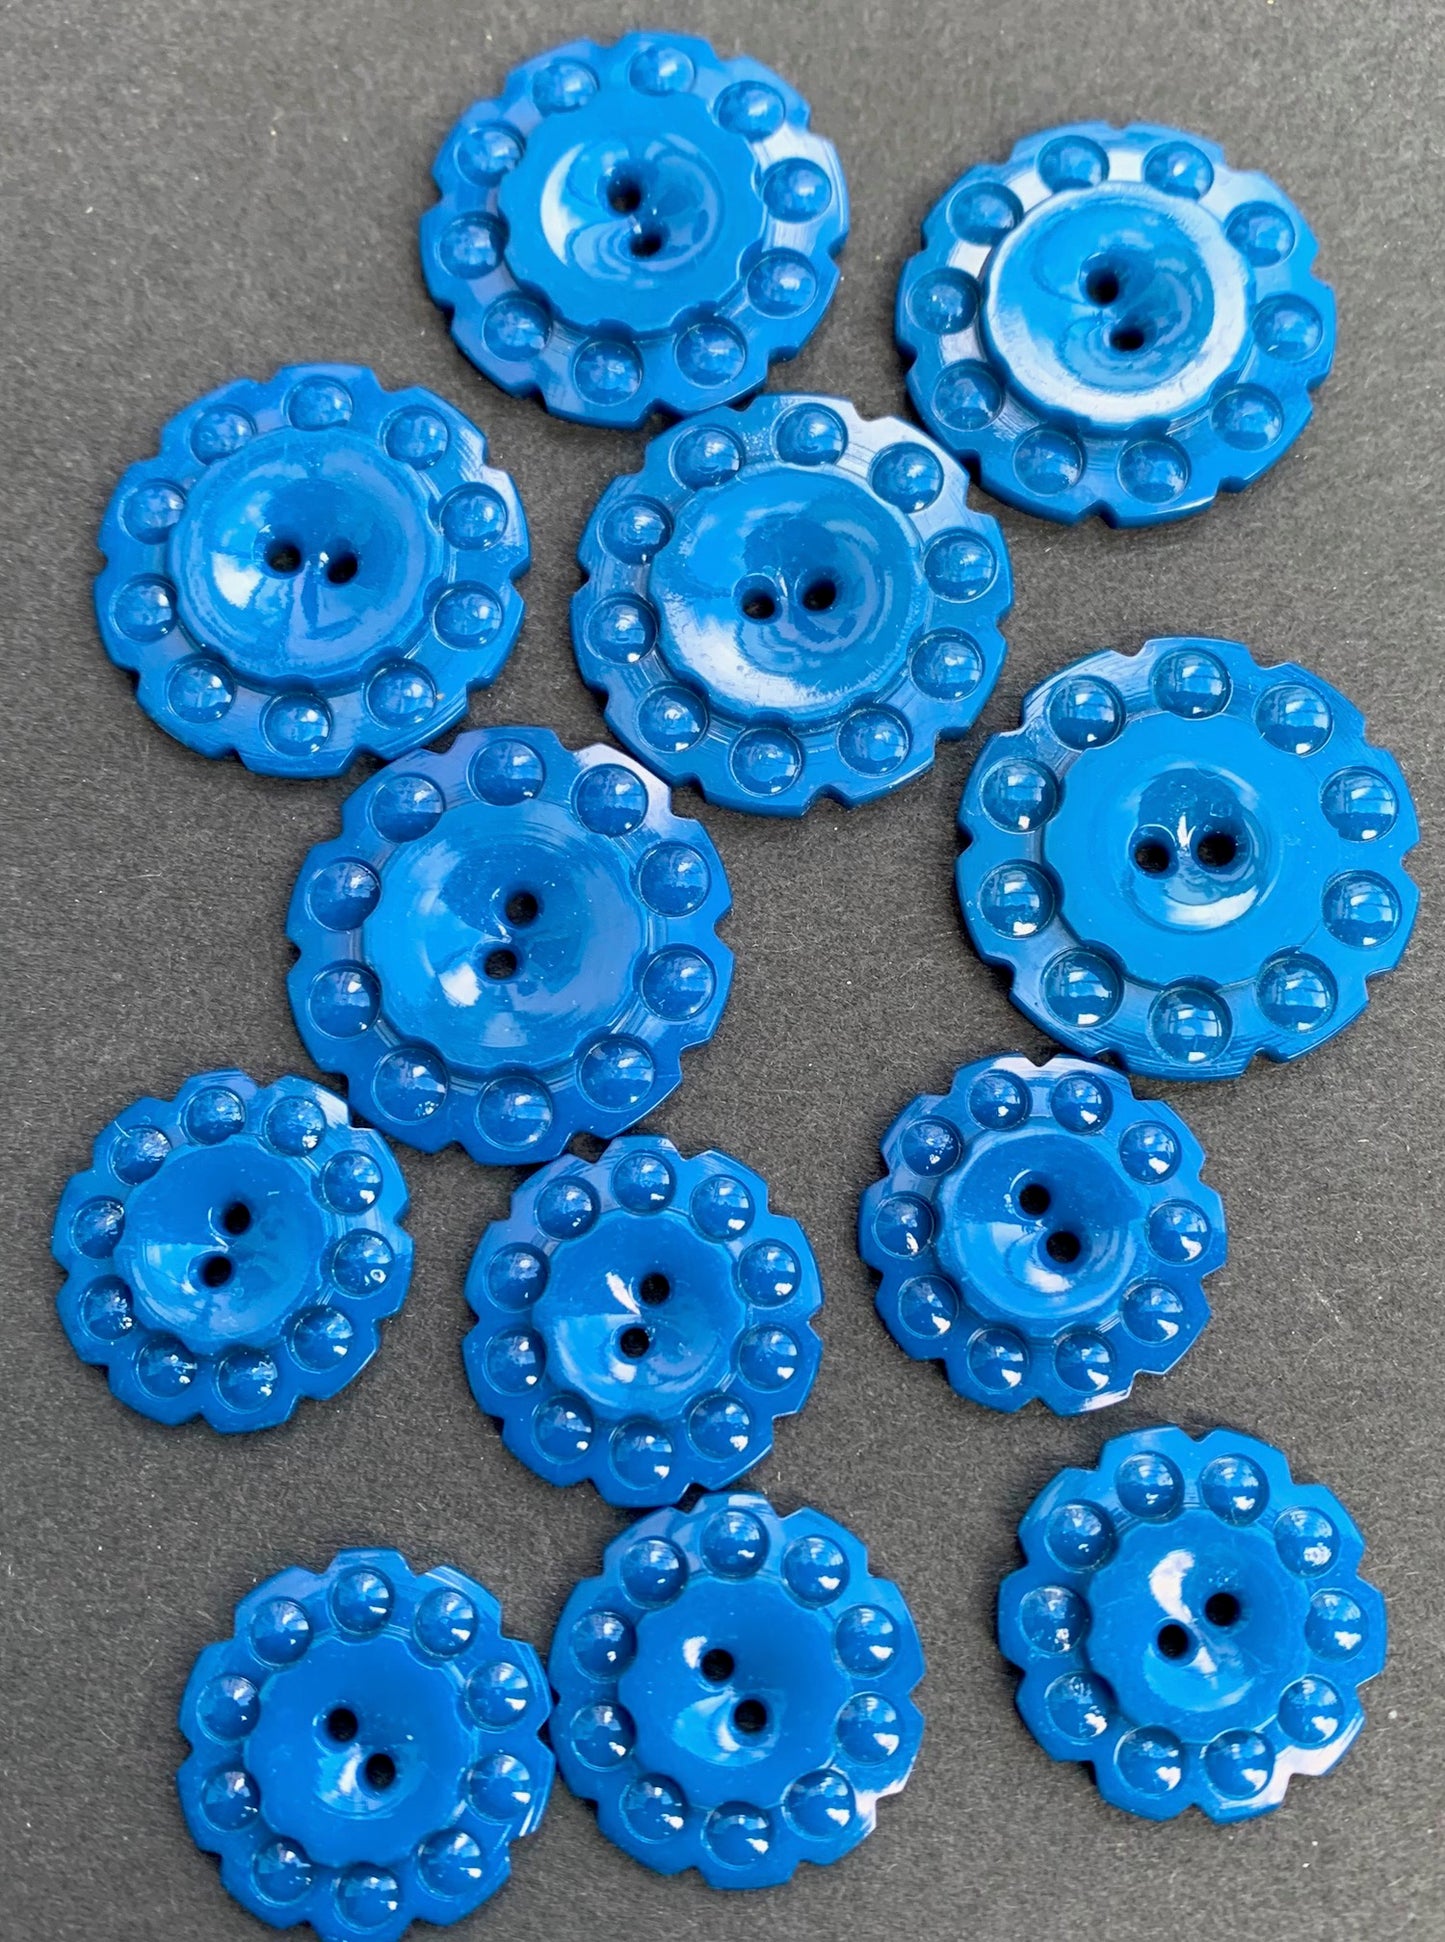 Sapphire Blue vintage  Buttons - 1.7cm or 2.2cm, Lots of 6 or Sheet of 24